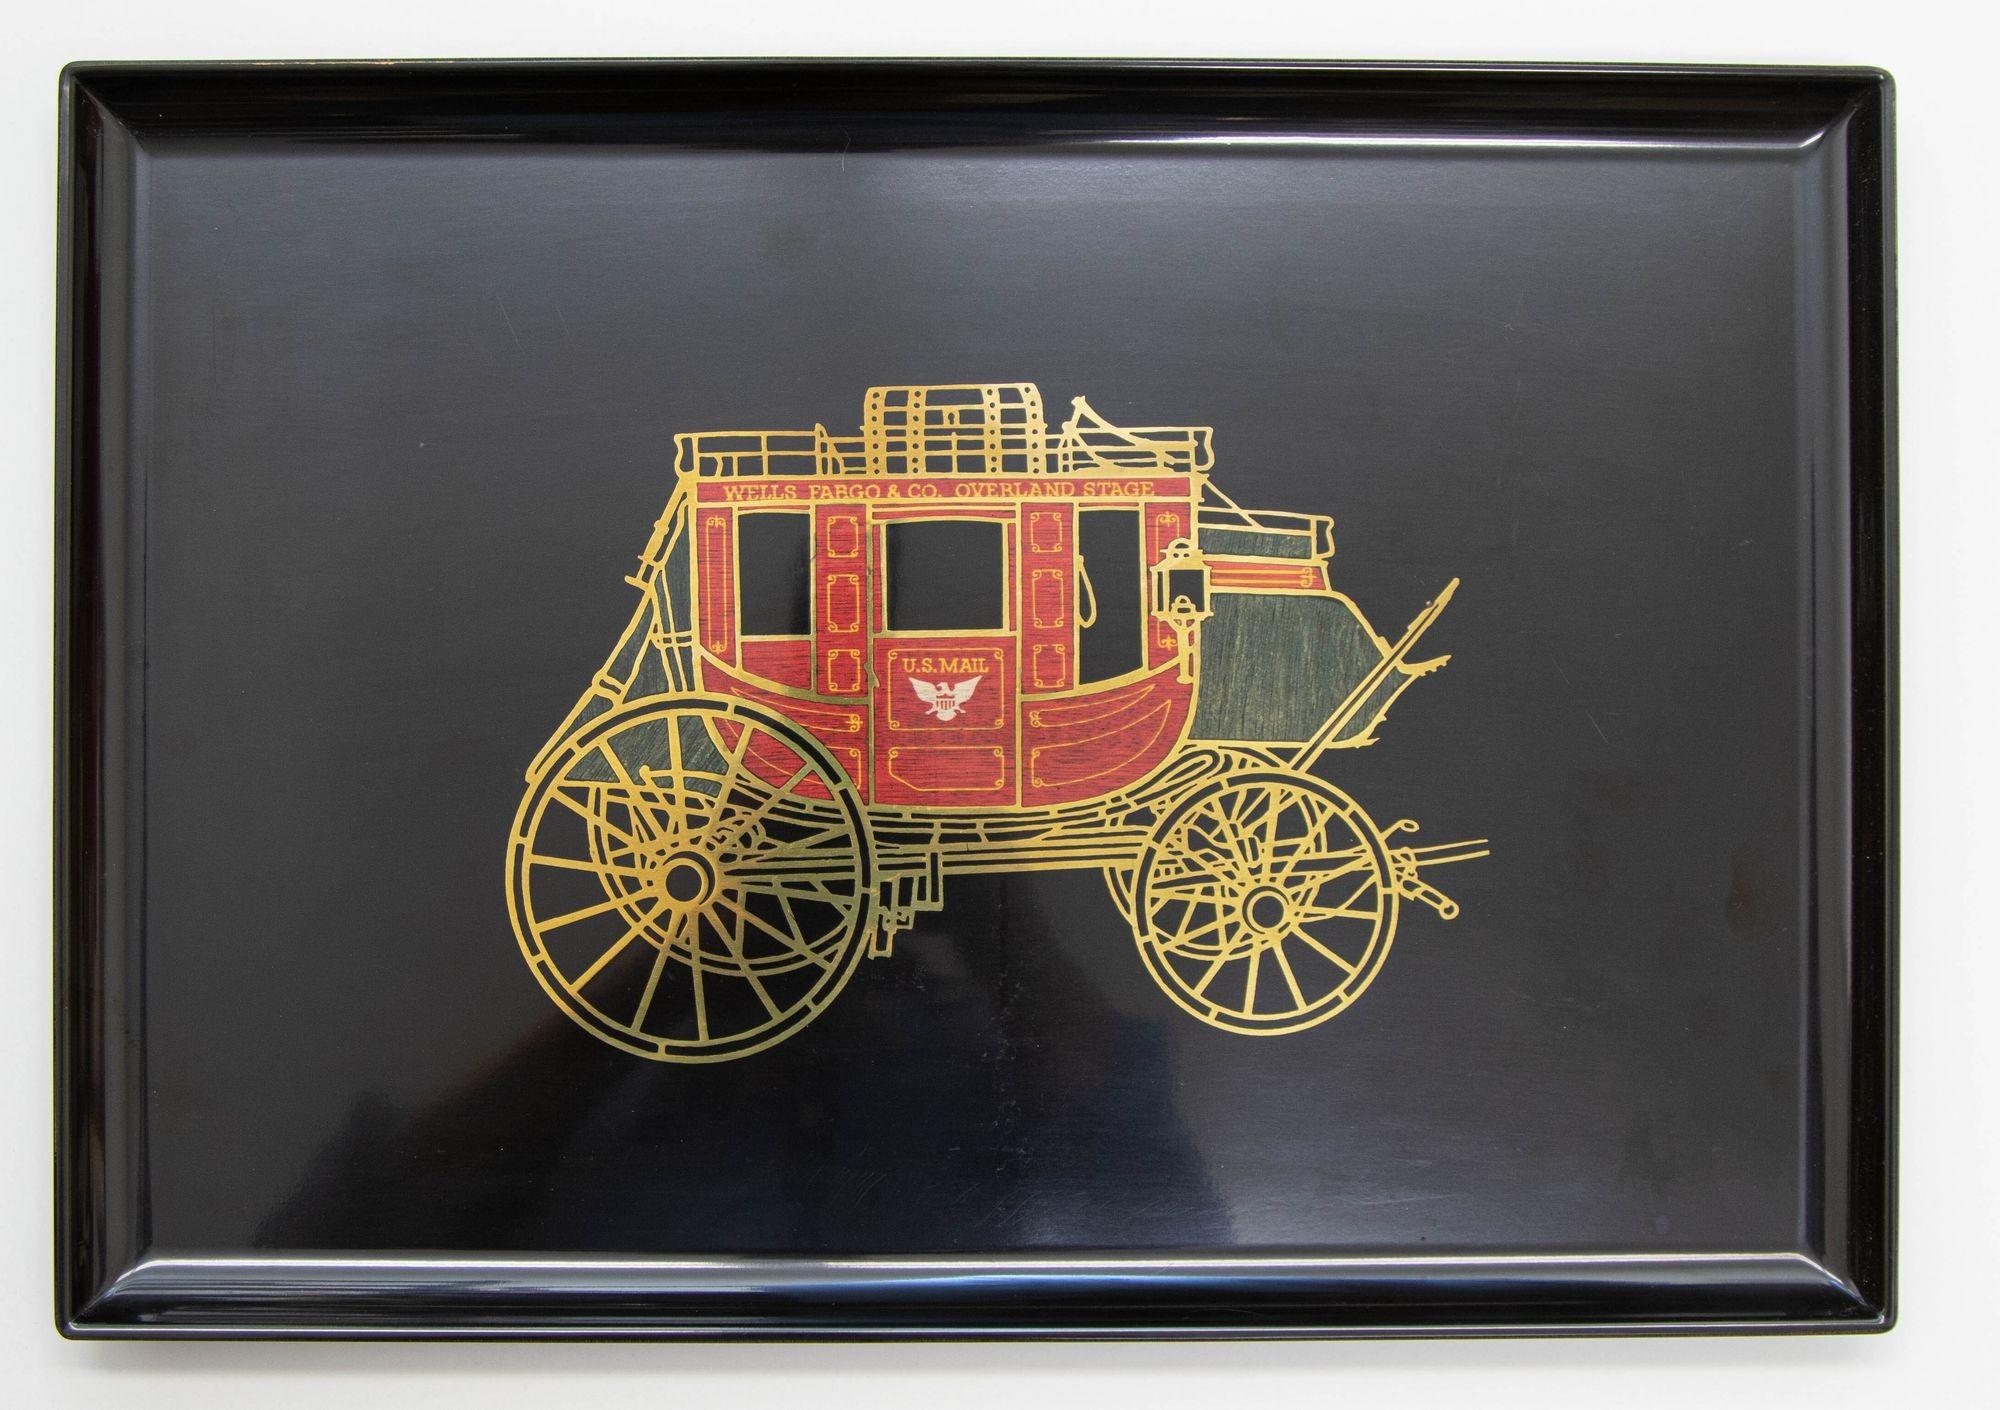 1960s Vintage Couroc of Monterey Black Resin Bakelite Like Tray Featuring the Wells Fargo Stagecoach.
Dimensions: Large 18” x 12.5”.
A unique and charming black serving tray from the Mid 20th century, featuring an intricate Wells Fargo Stage Coach